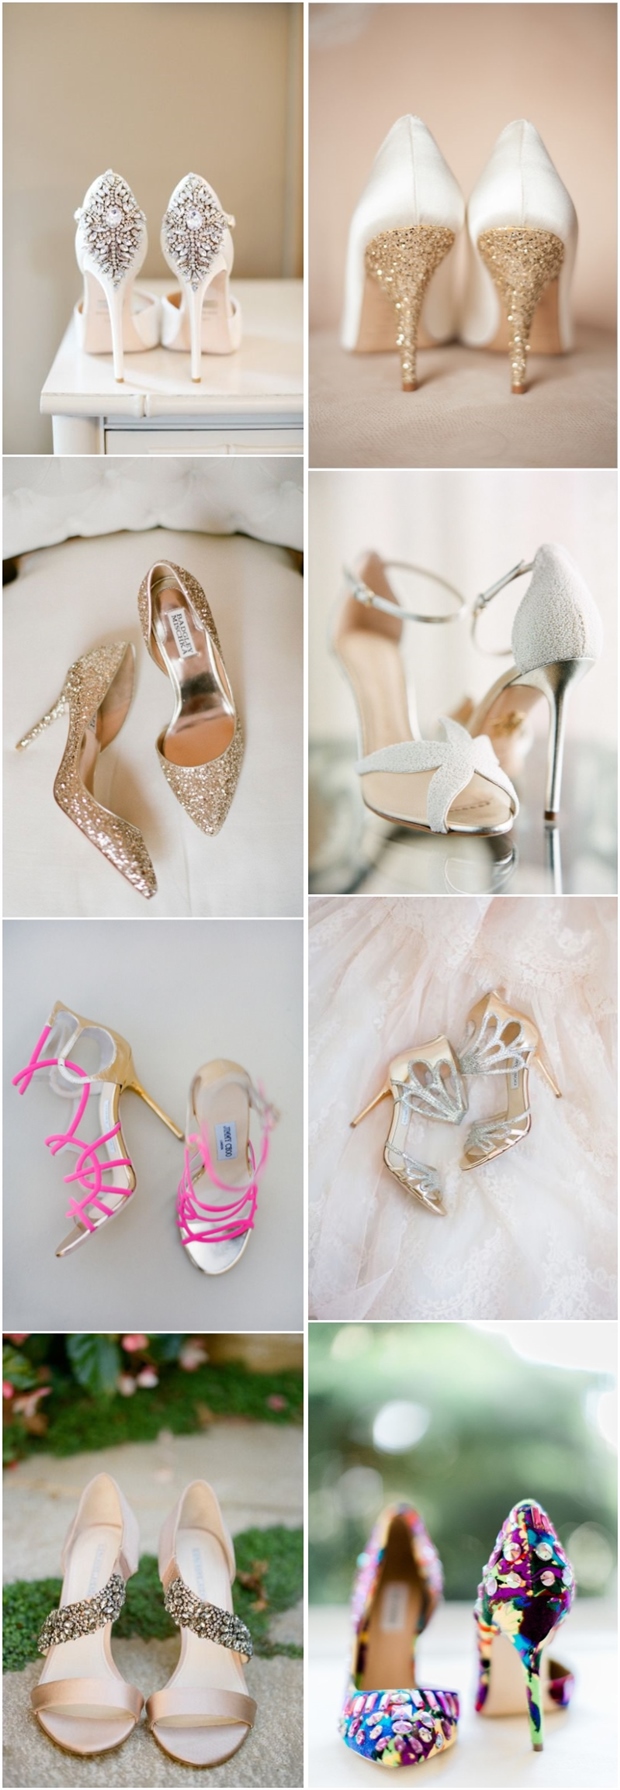 sparkles bridal shoes and wedding shoes